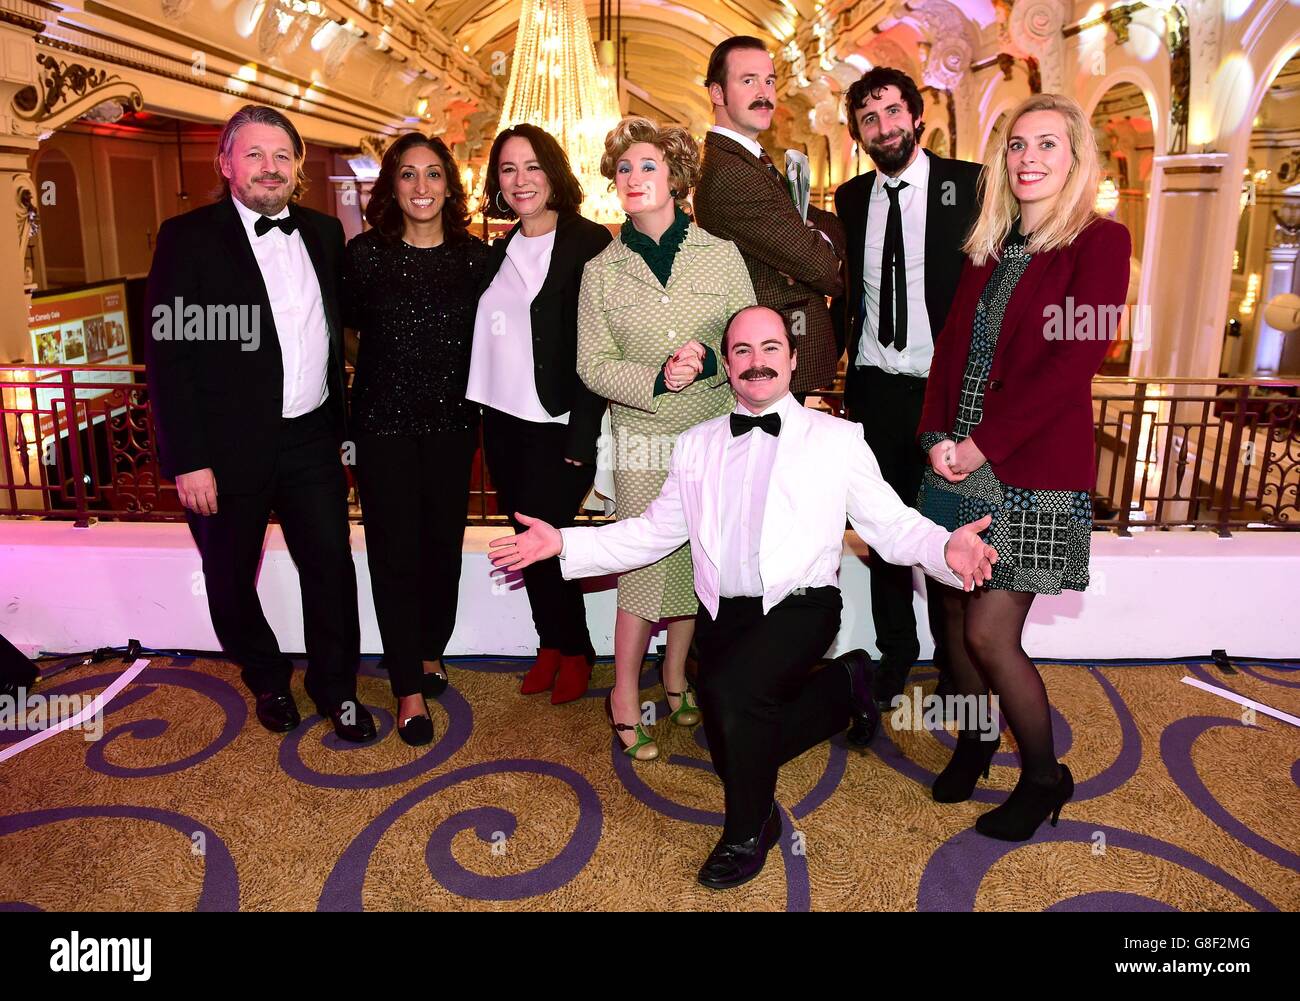 (From left) Richard Herring, Shazia Mirza and Arabella Weir, Mark Watson (second right) and Sara Pascoe (right) are joined by actors playing Sybil and Basil Fawlty and Manuel from Fawlty Towers at the Winter Comedy Gala in aid of ActionAid at the Grand Connaught Rooms in London. Stock Photo